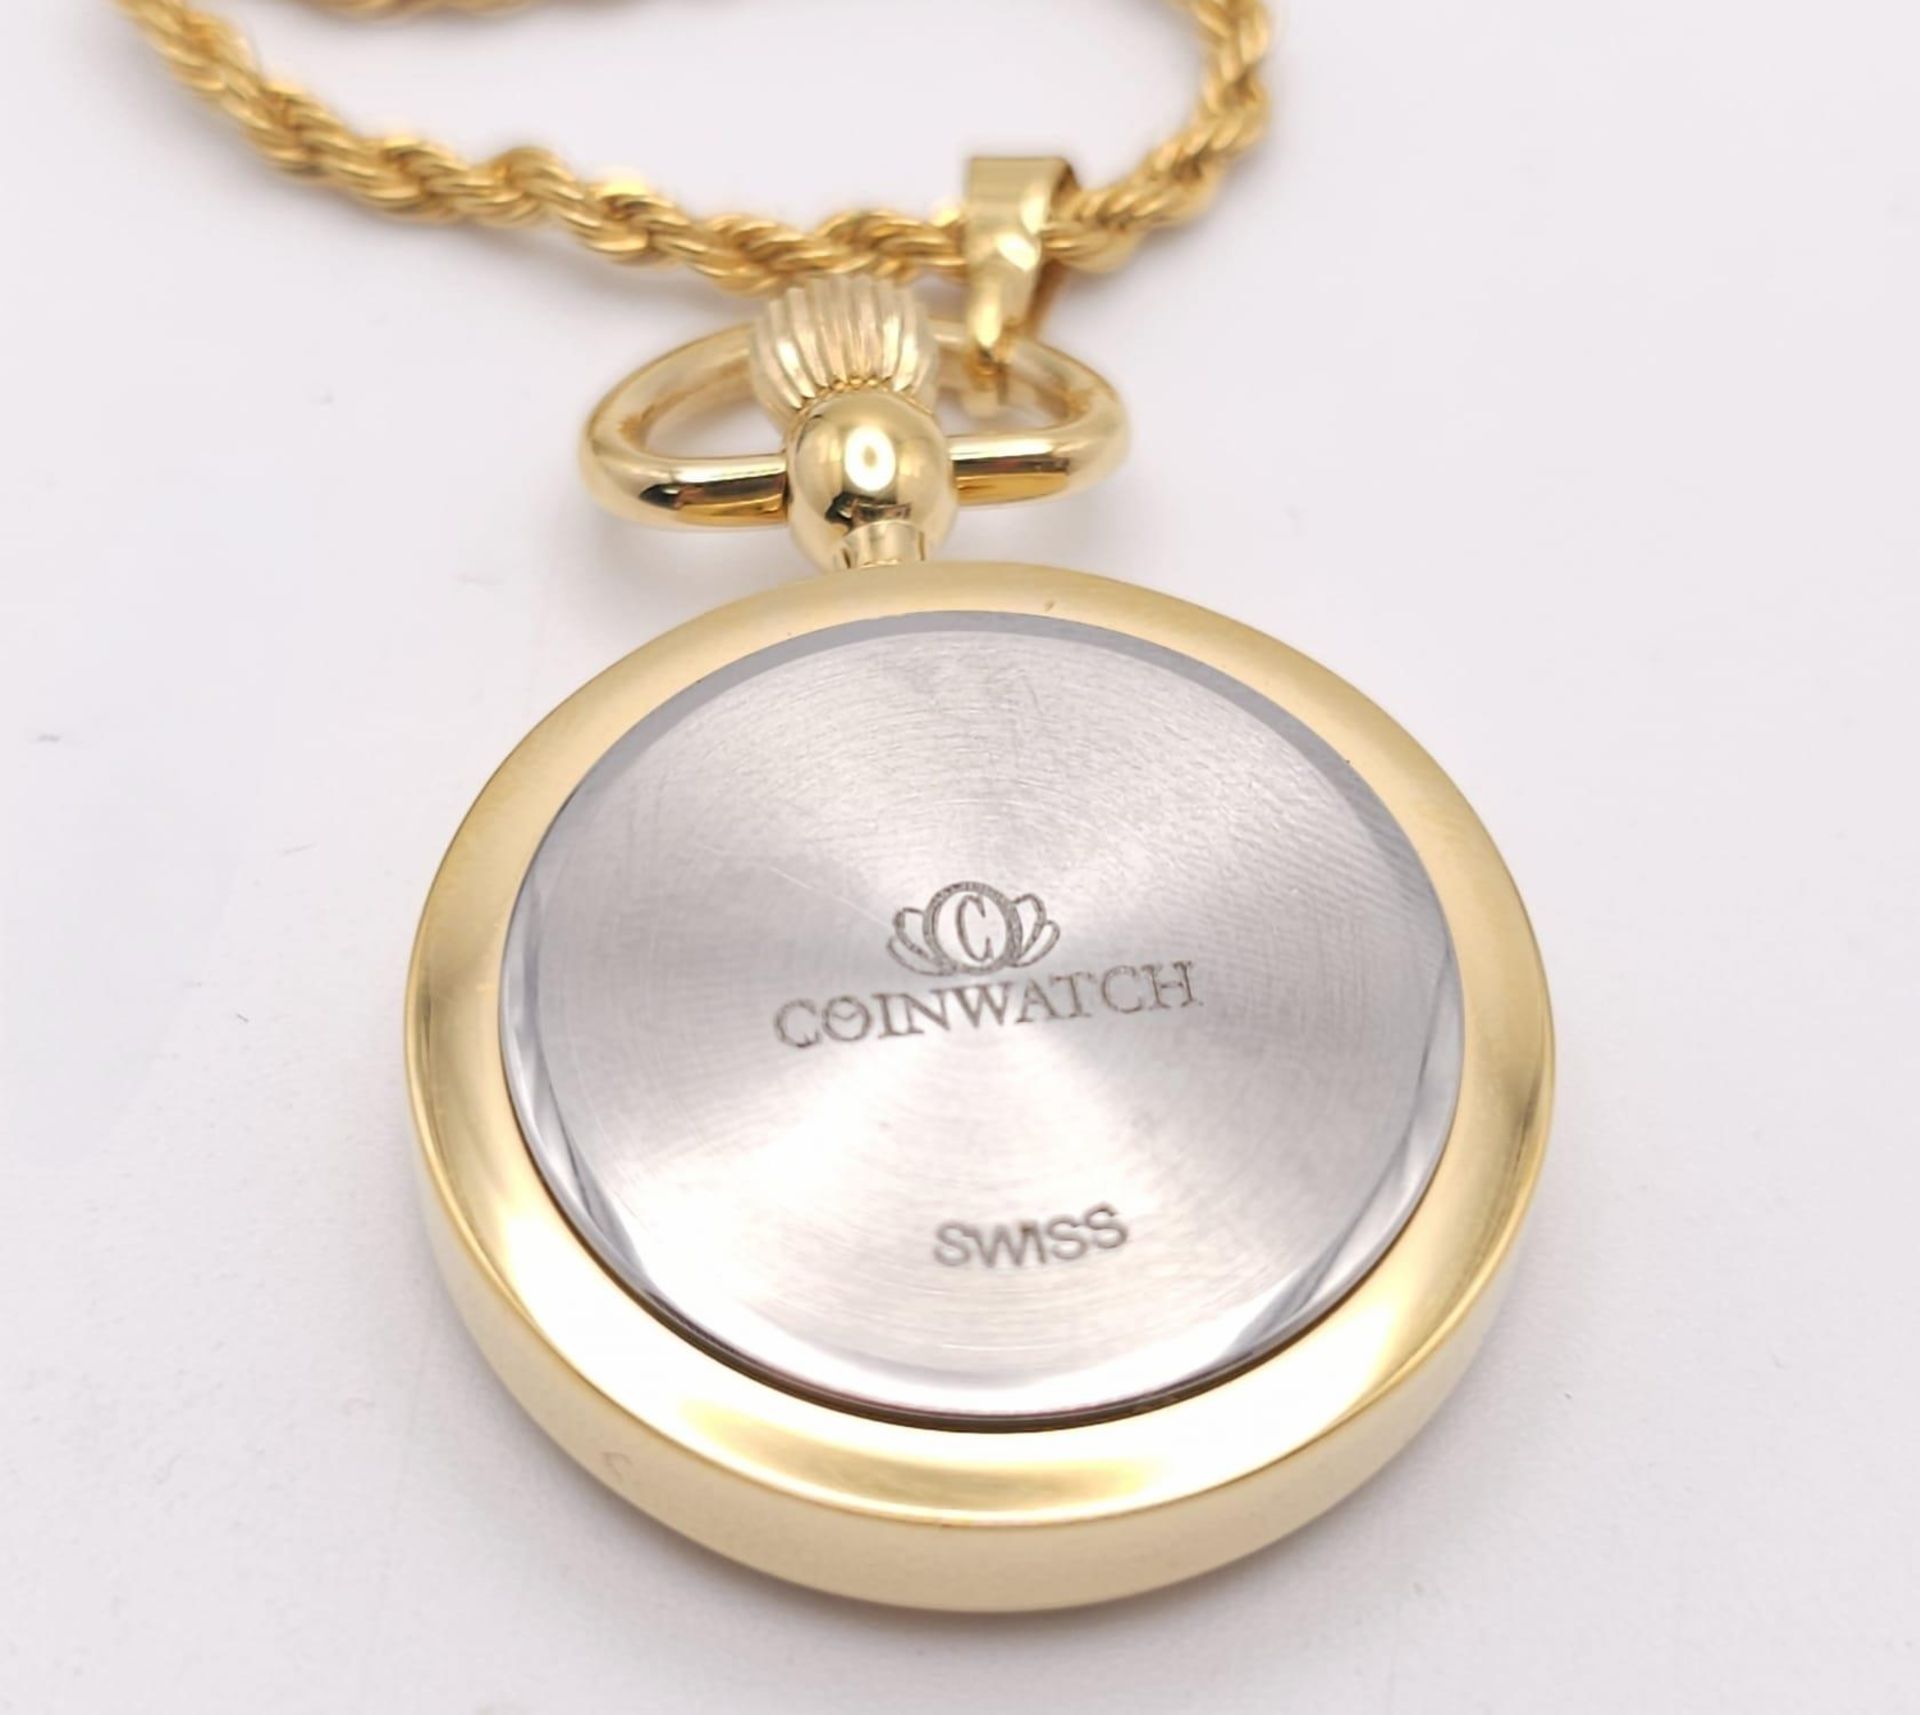 A BRAND NEW "COINWATCH" WITH 2 YEAR GUARANTEE . A PENDANT WATCH WITH A GENUINE COIN AS THE DIAL , - Bild 8 aus 18